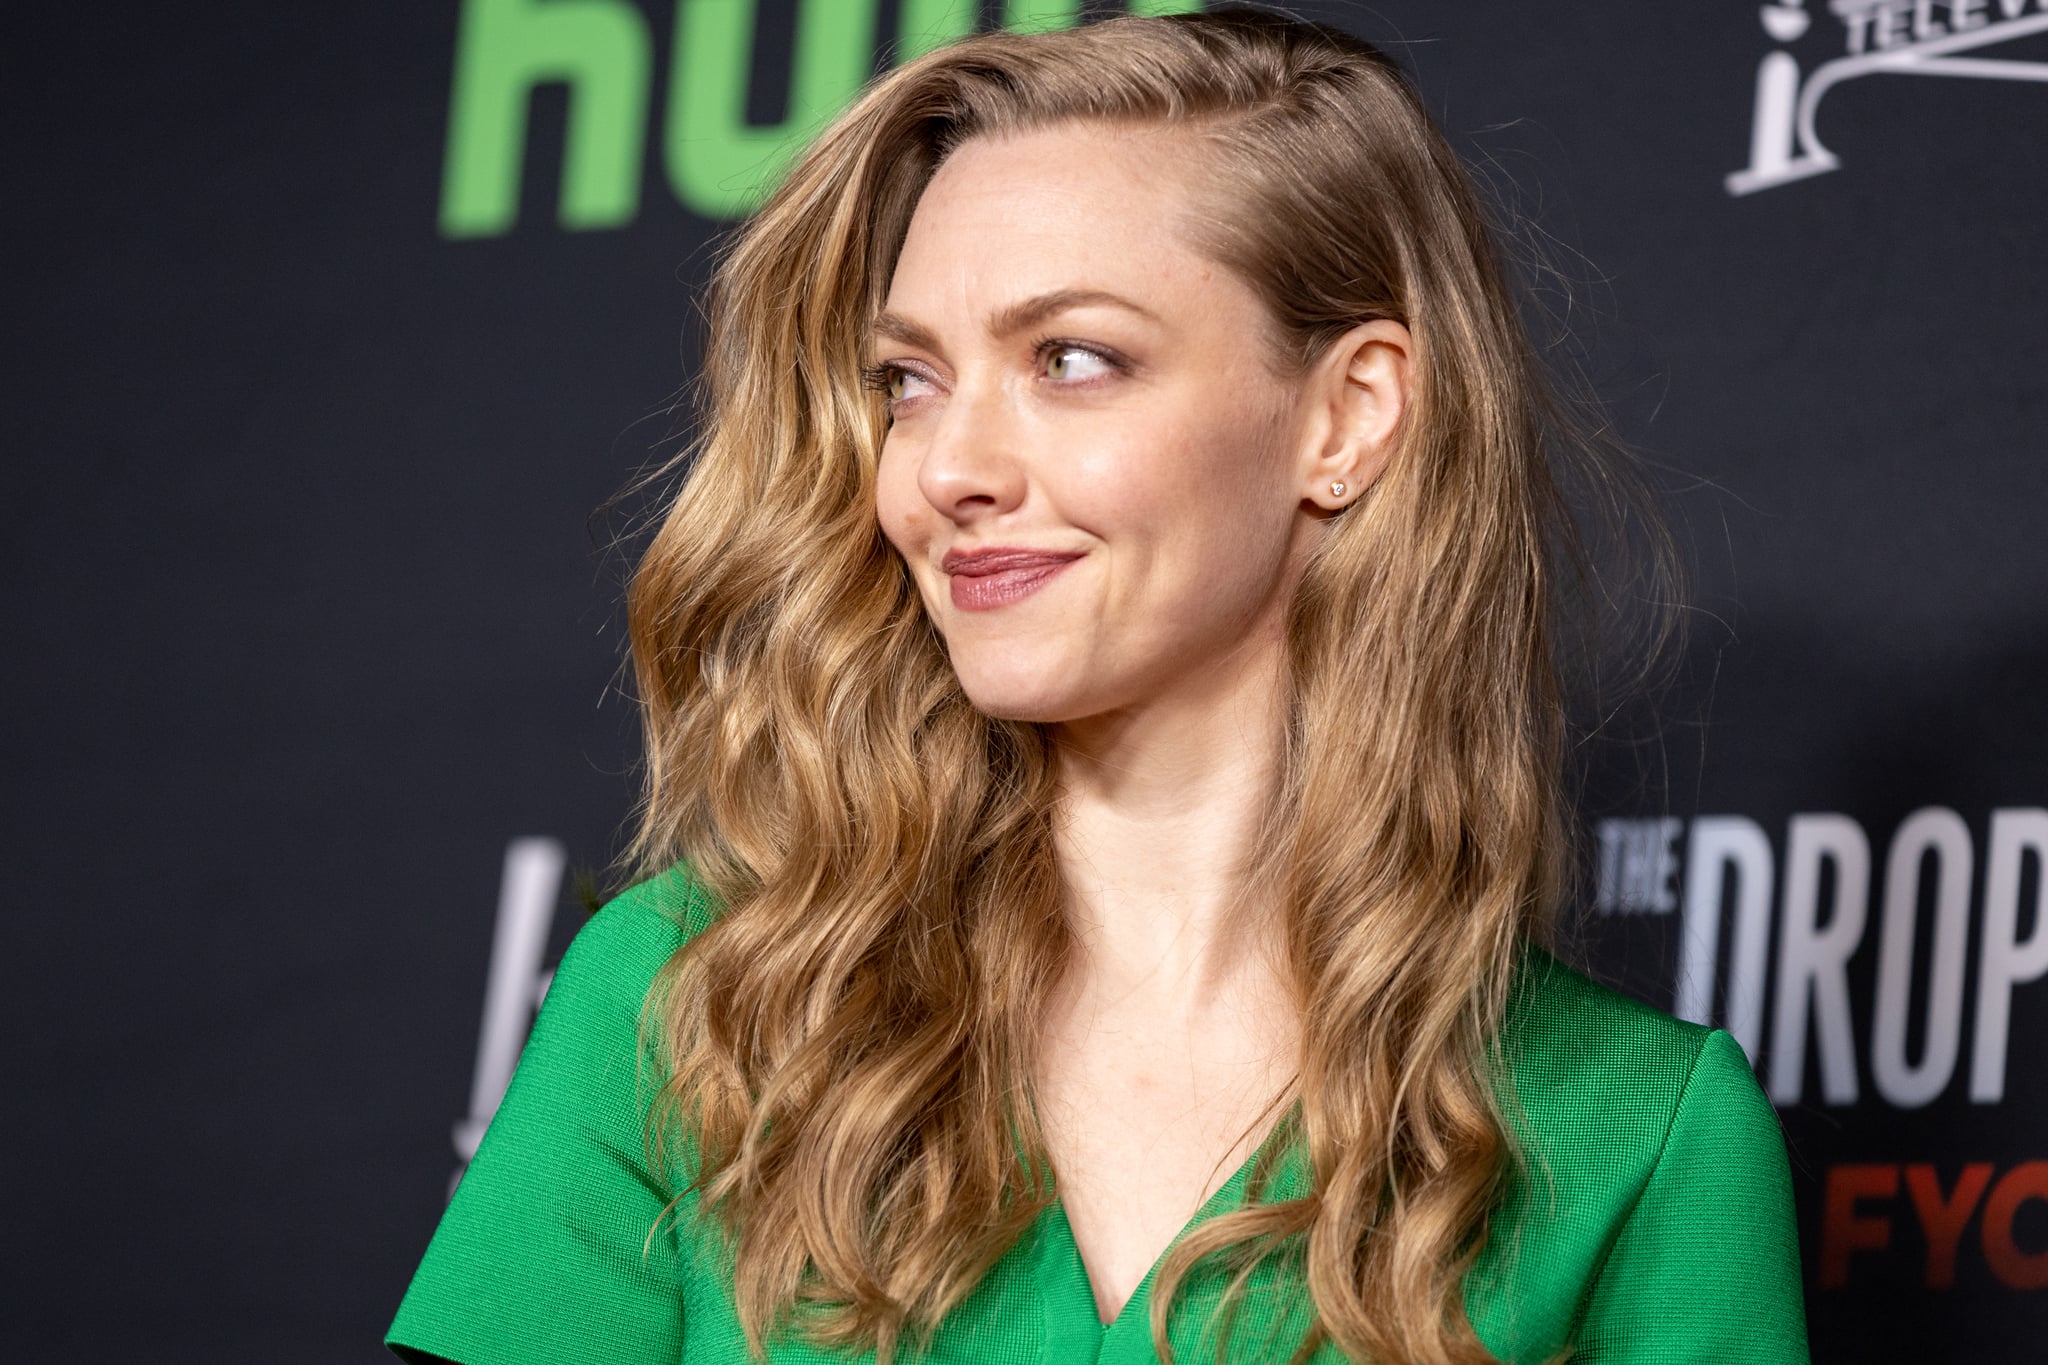 LOS ANGELES, CALIFORNIA - APRIL 11: Amanda Seyfried attends the Los Angeles finale event for Hulu's 'The Dropout' at Paramount Theatre on April 11, 2022 in Los Angeles, California. (Photo by Emma McIntyre/WireImage)